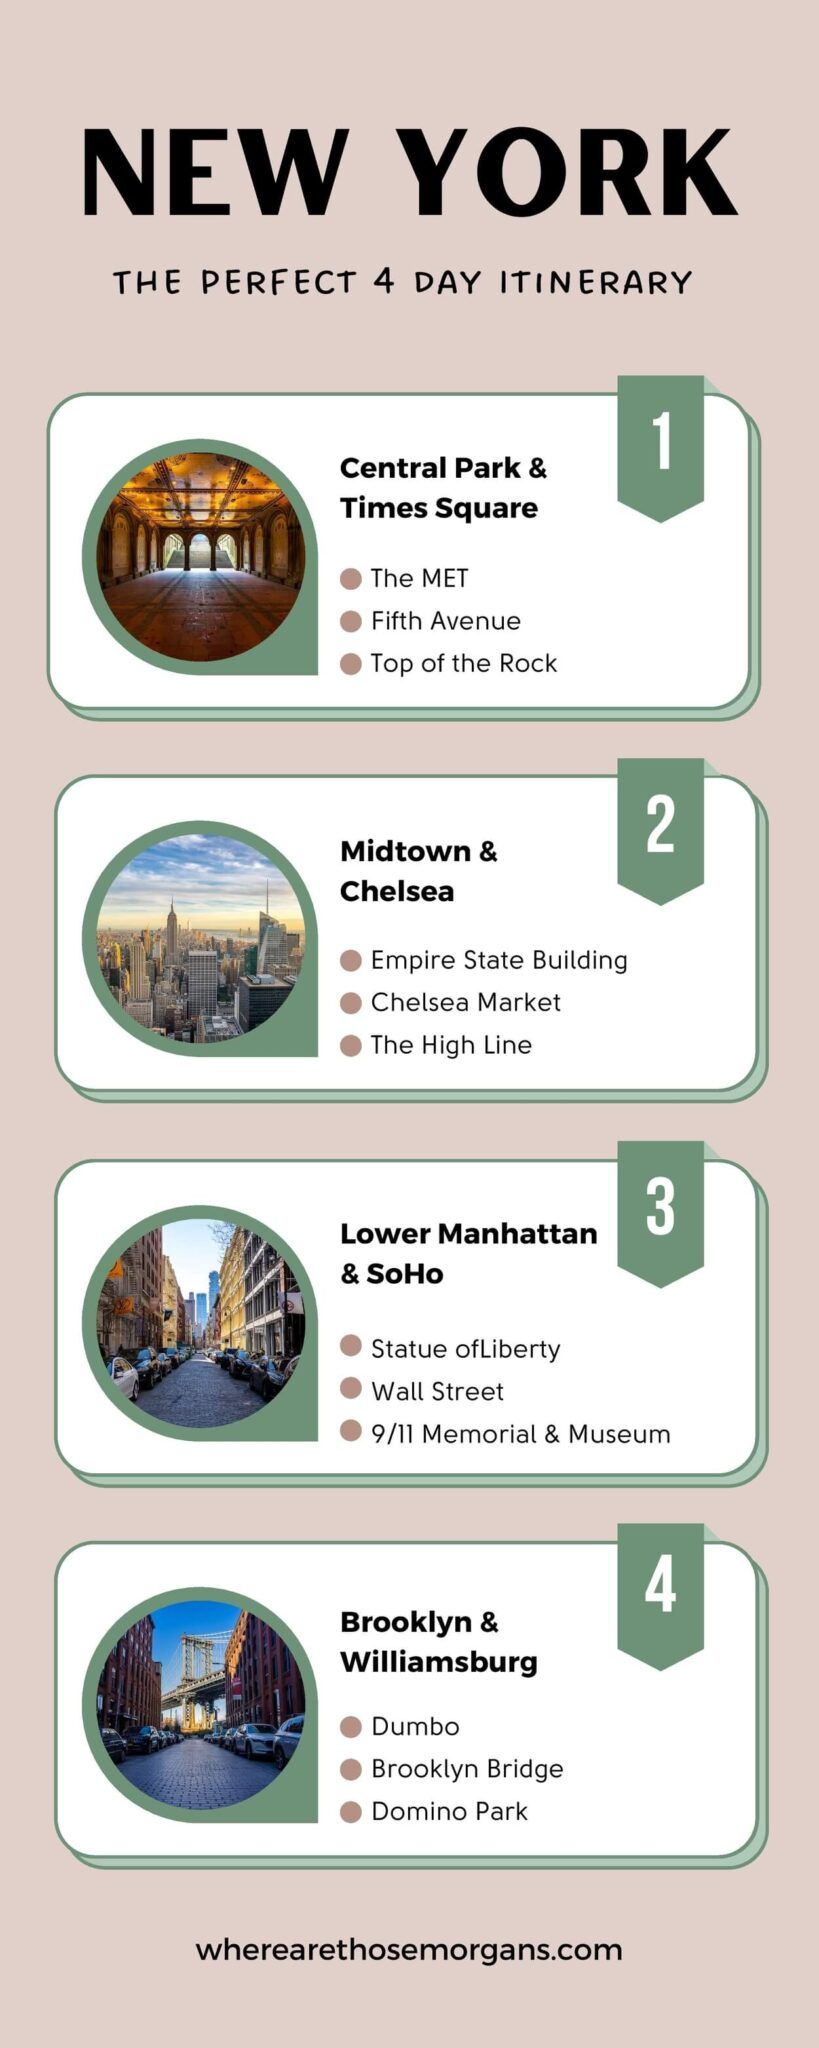 4 Days In New York Itinerary How To Plan The Perfect NYC Trip